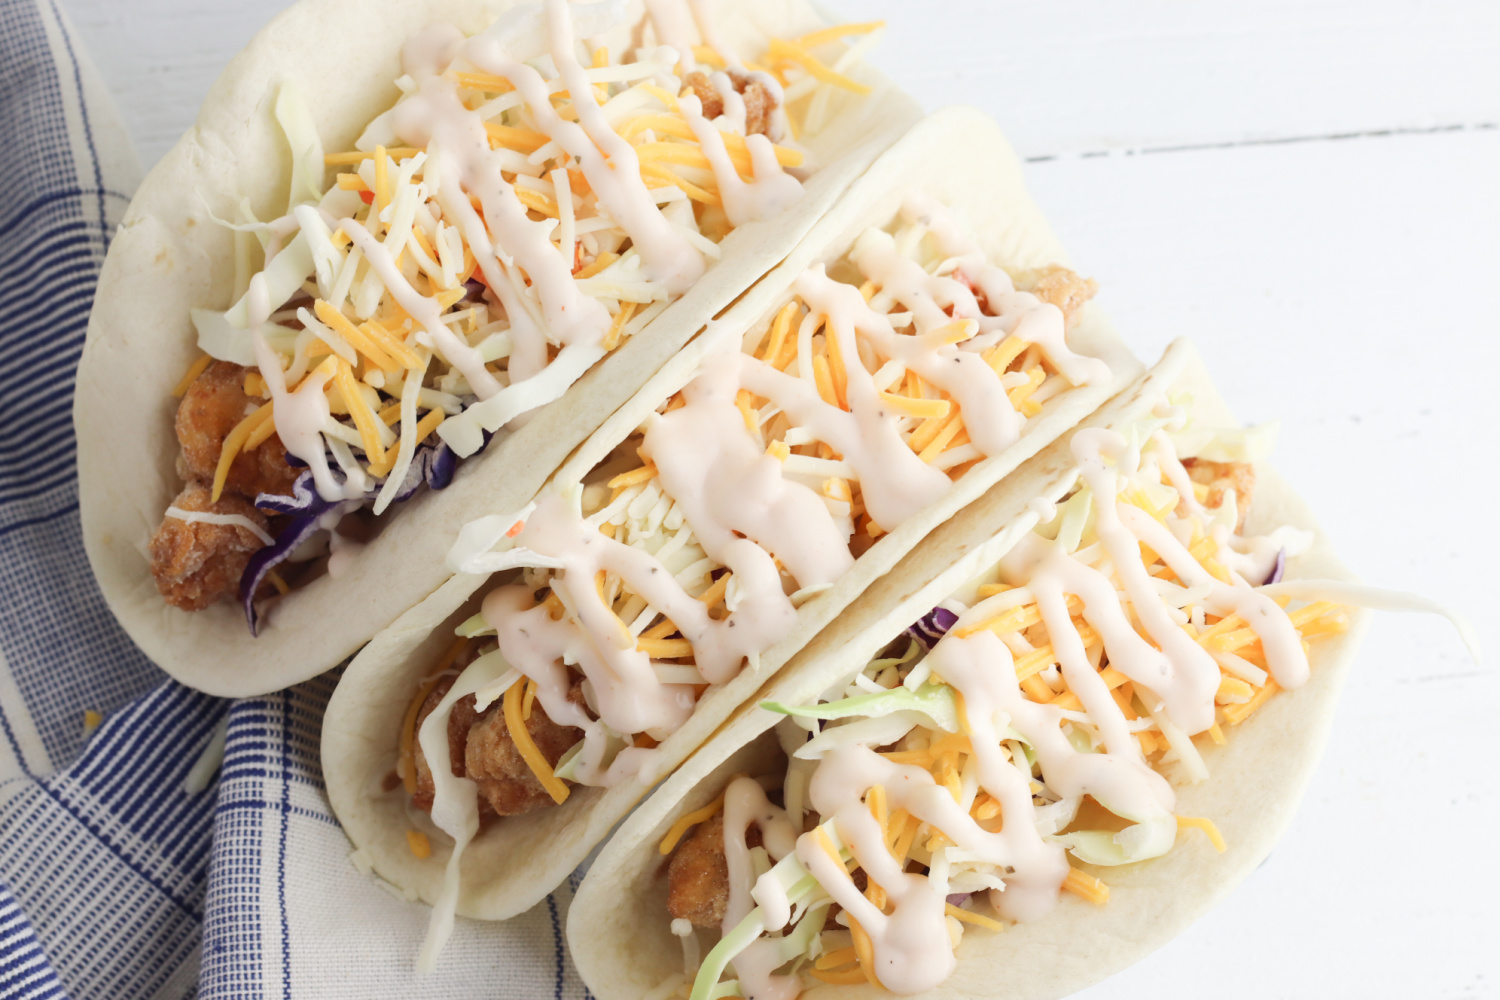 Fried Chicken Tacos with cheese and lettuce.